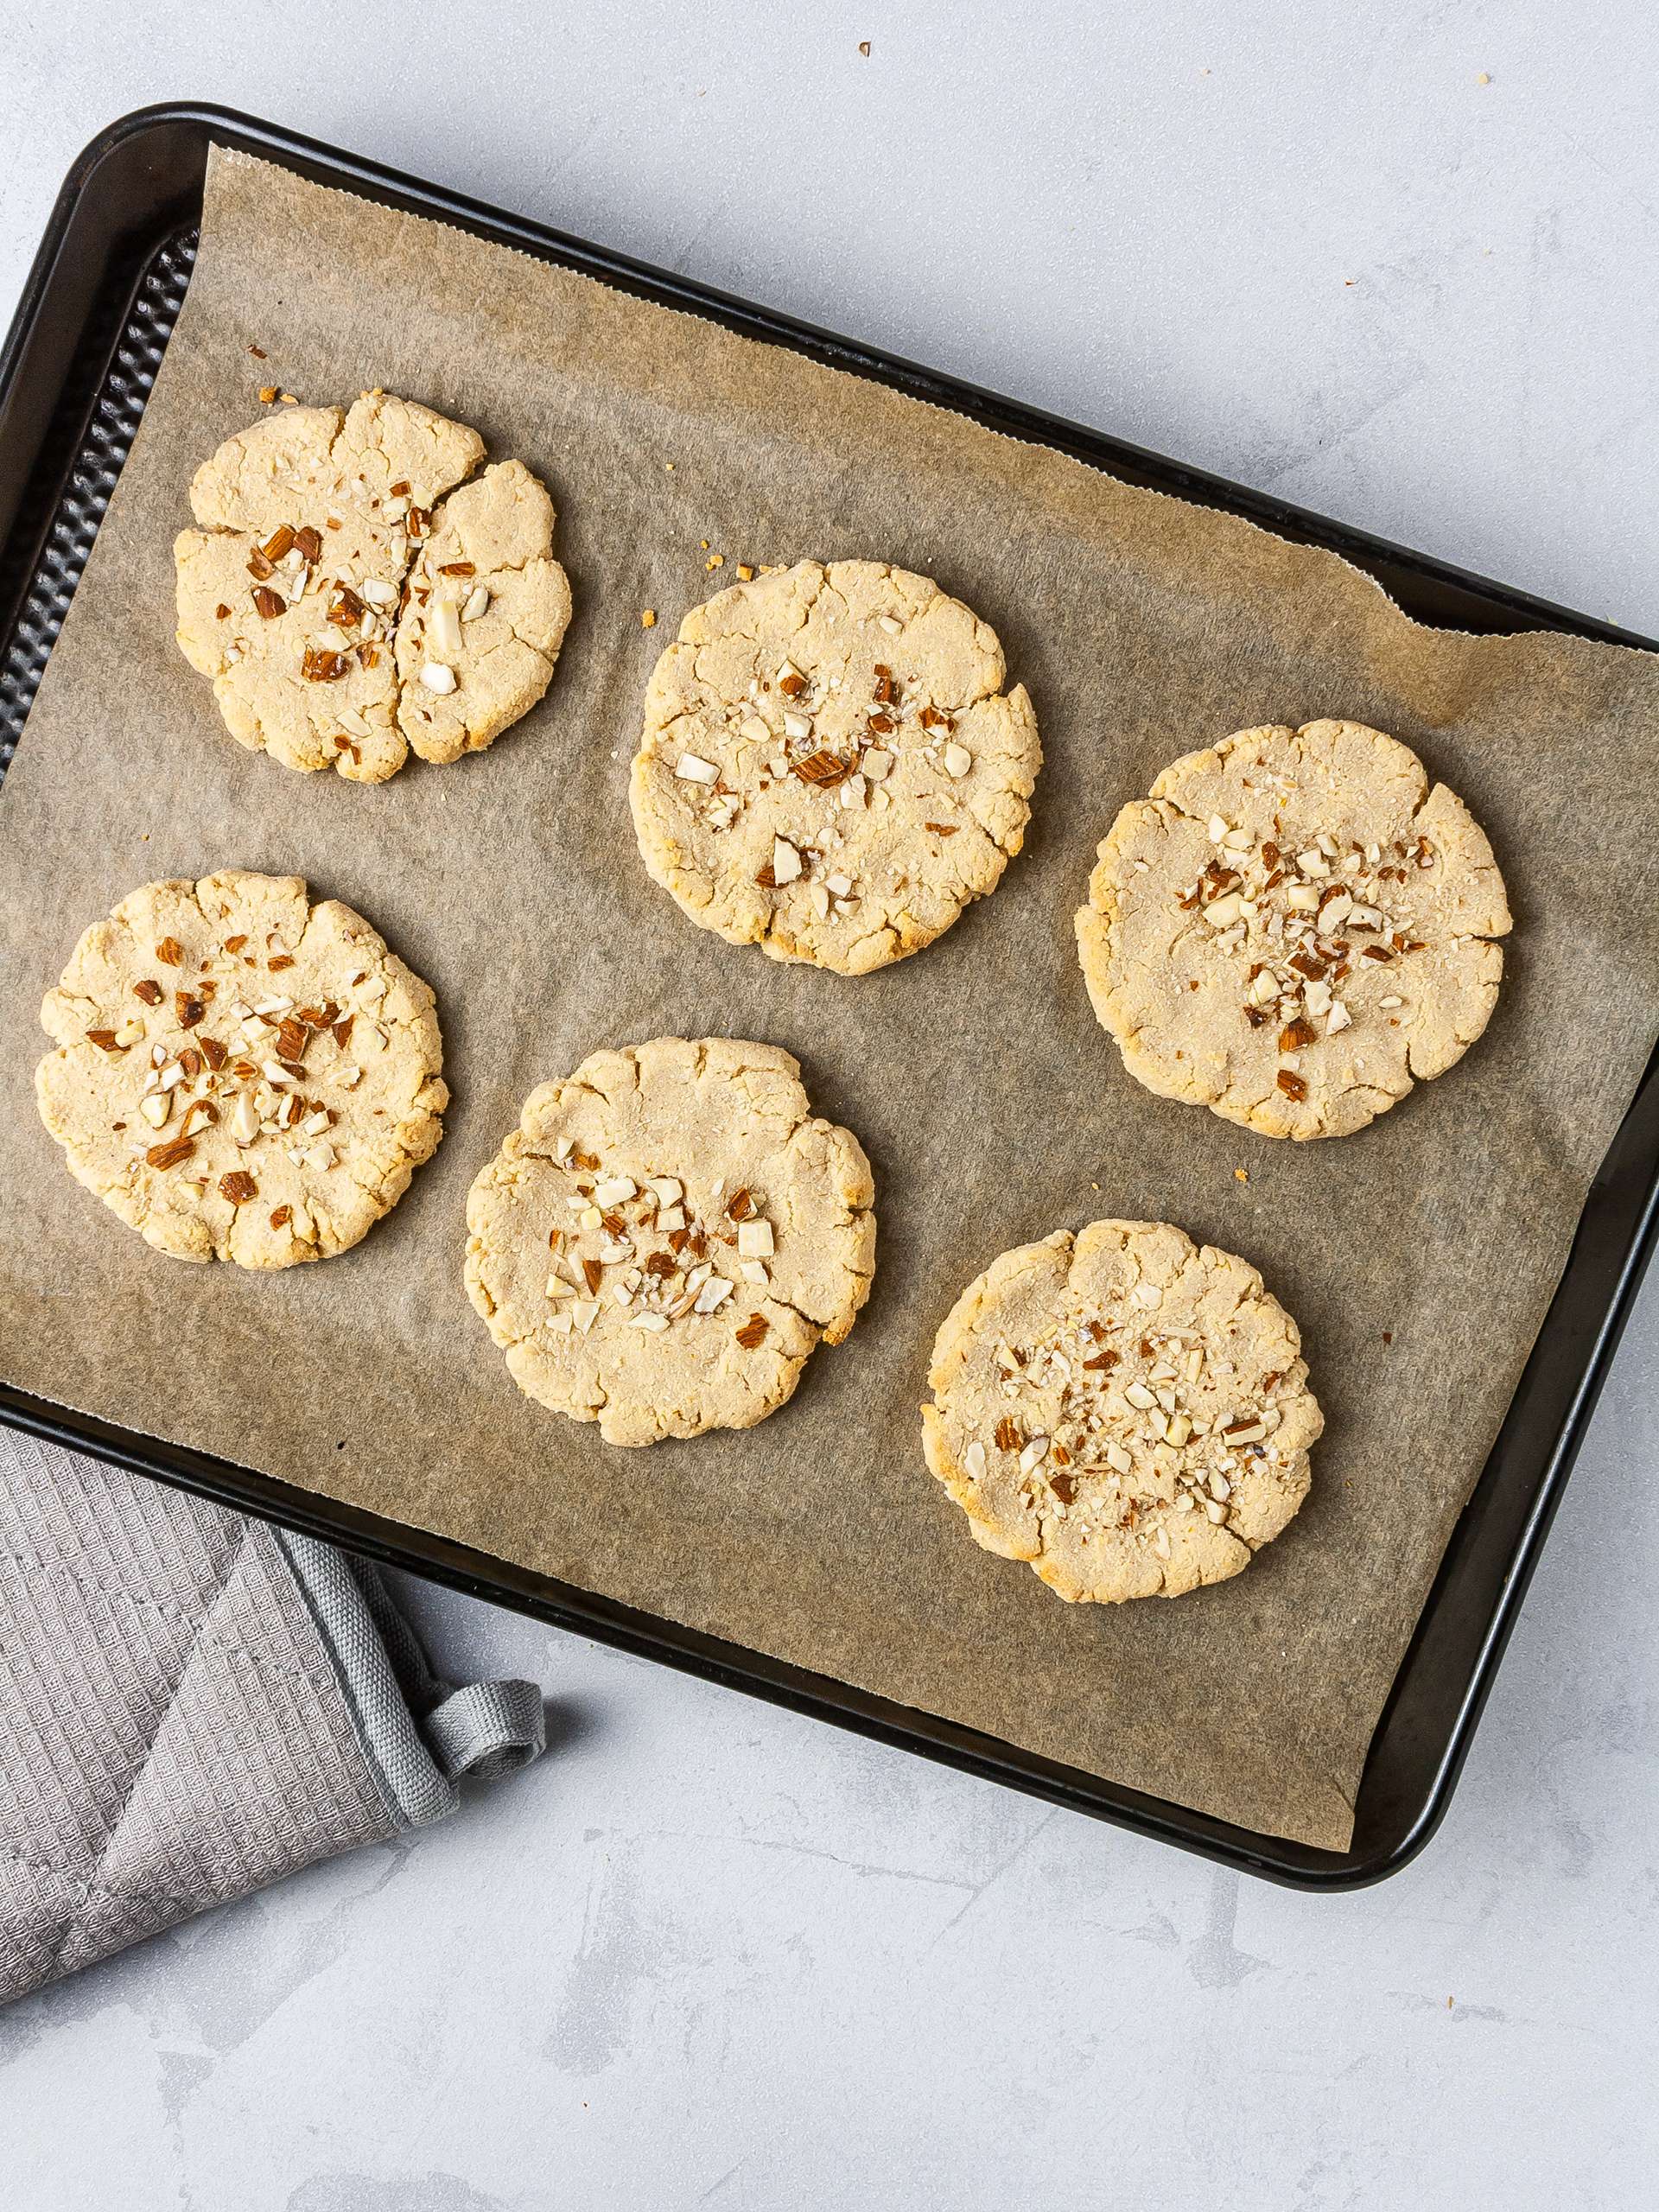 Baked almond cream cheese cookies on a baking tray.